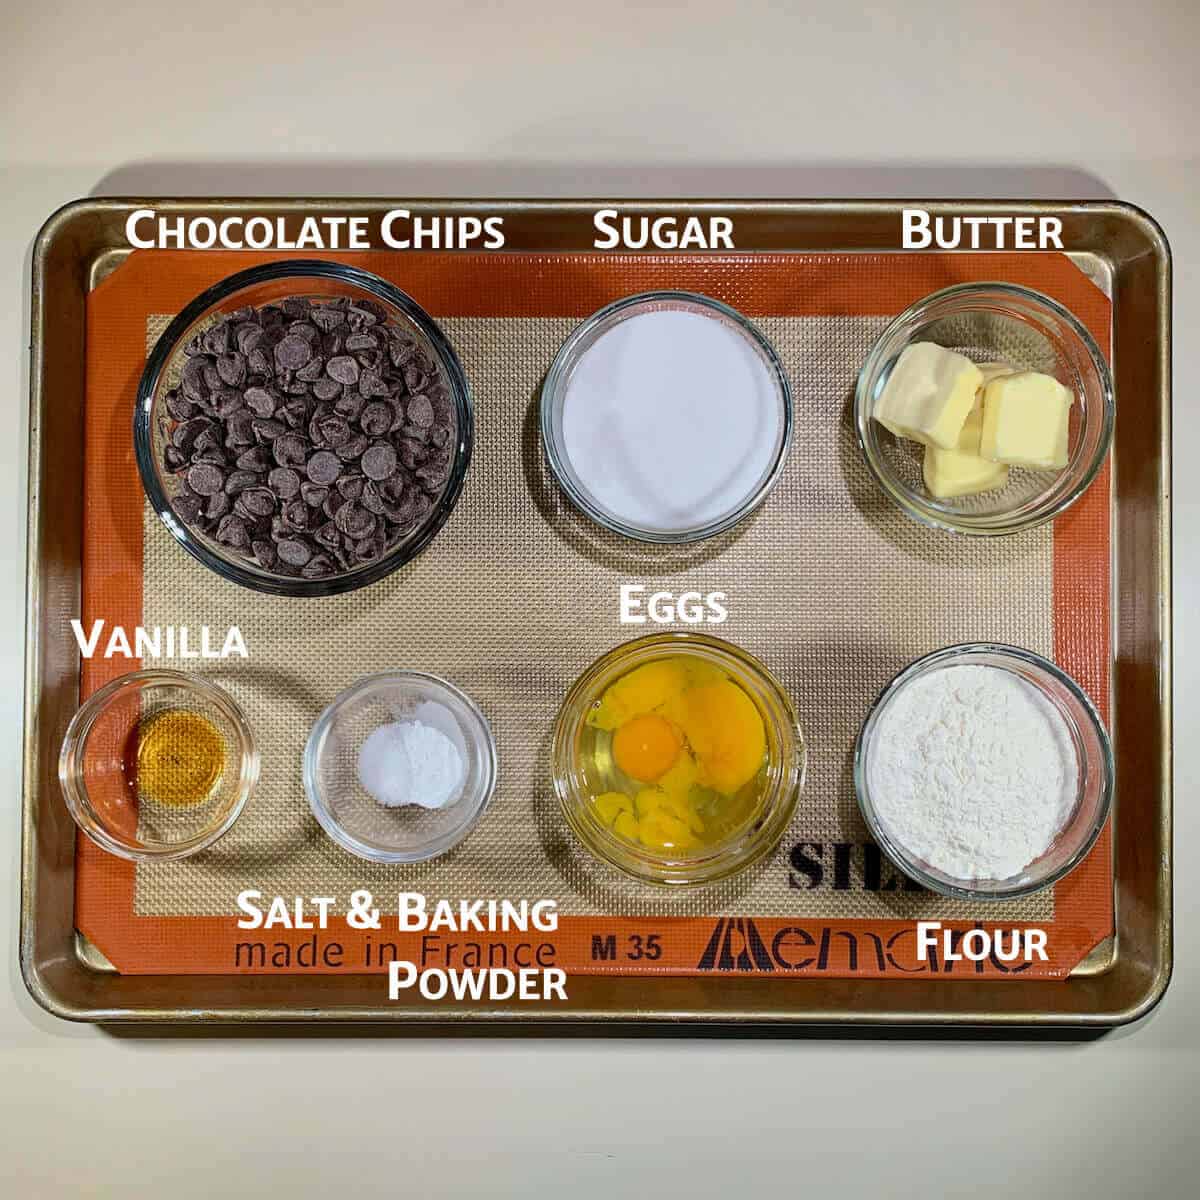 Fudge brownies ingredients portioned into glass bowls on tray from overhead.